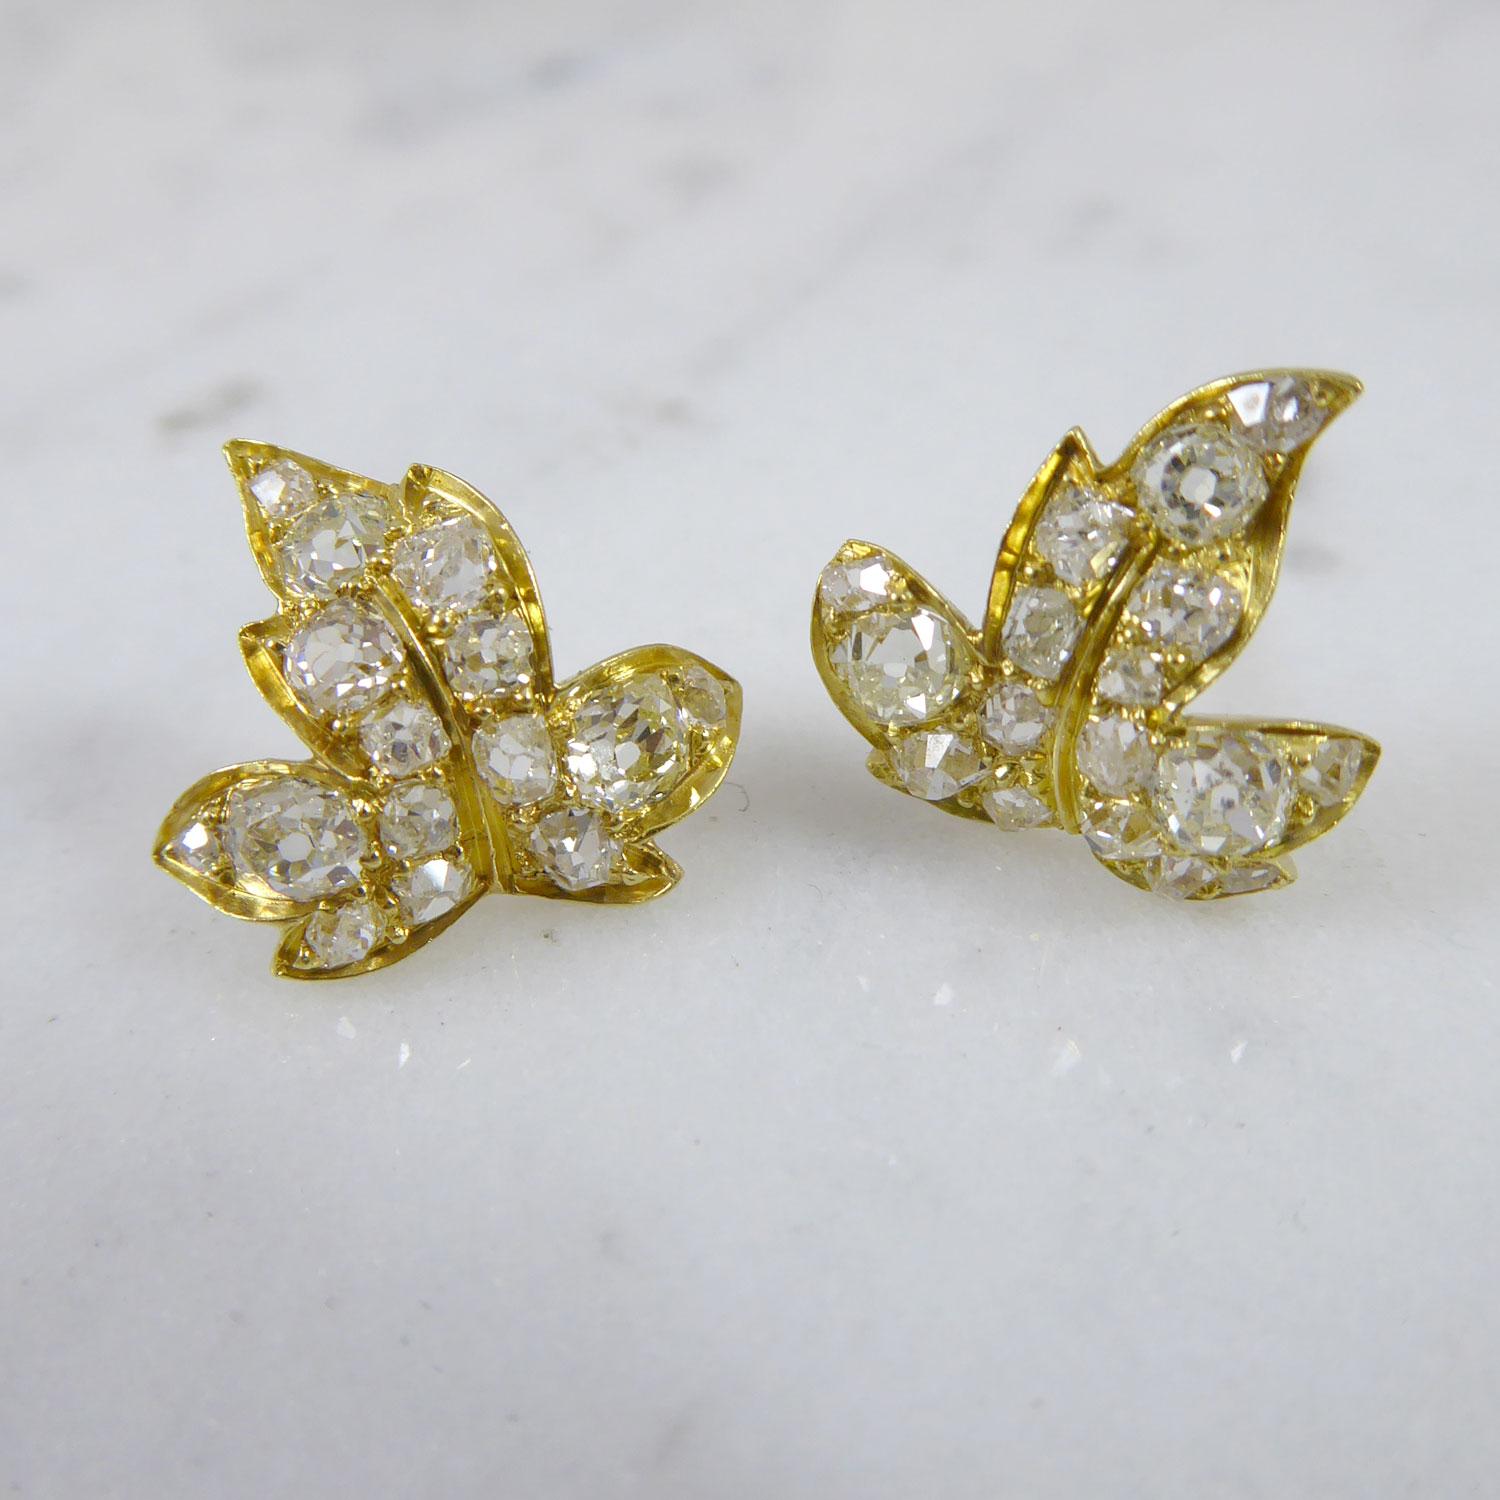 Crafted in the late Victorian era these earrings are known as 